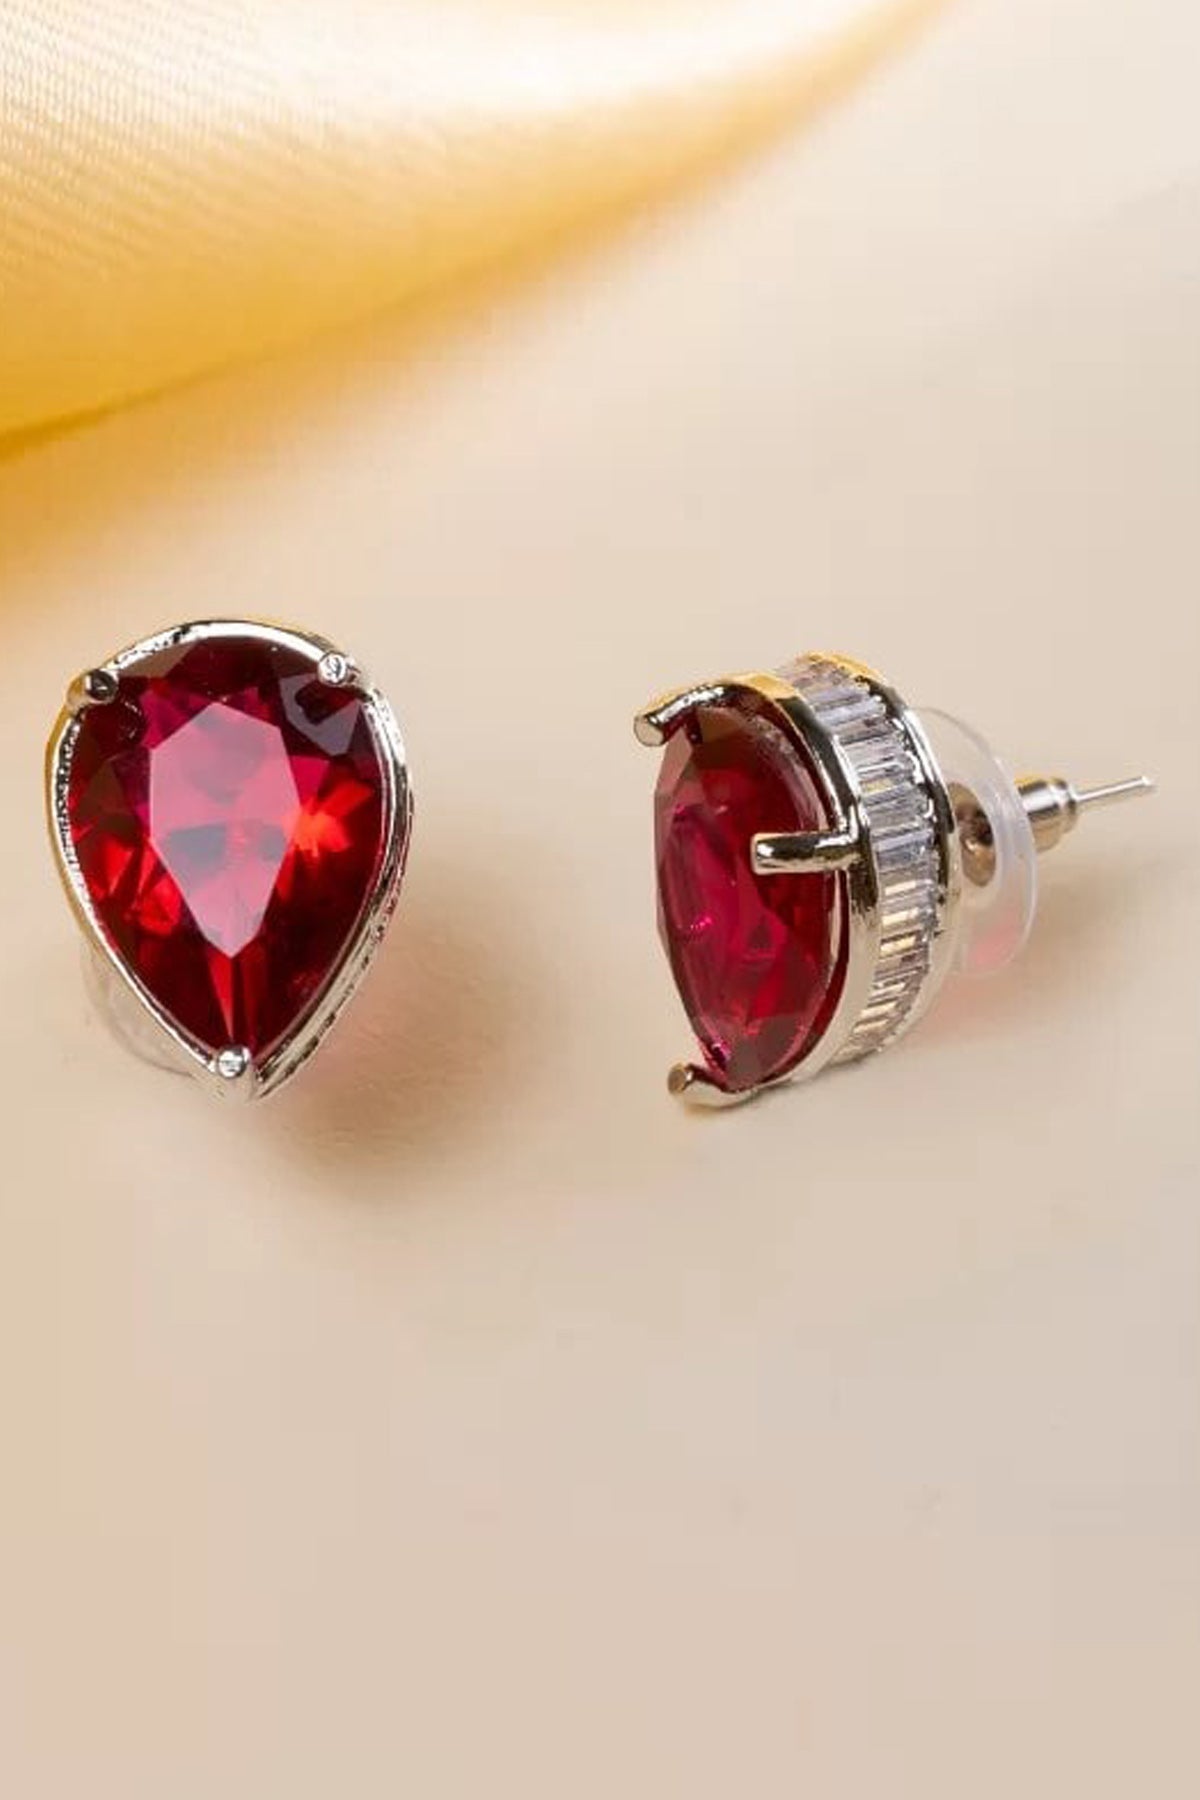 Red Diamond Leaf Shape Studs of Brand Putstyle Available online at ScrollnShops